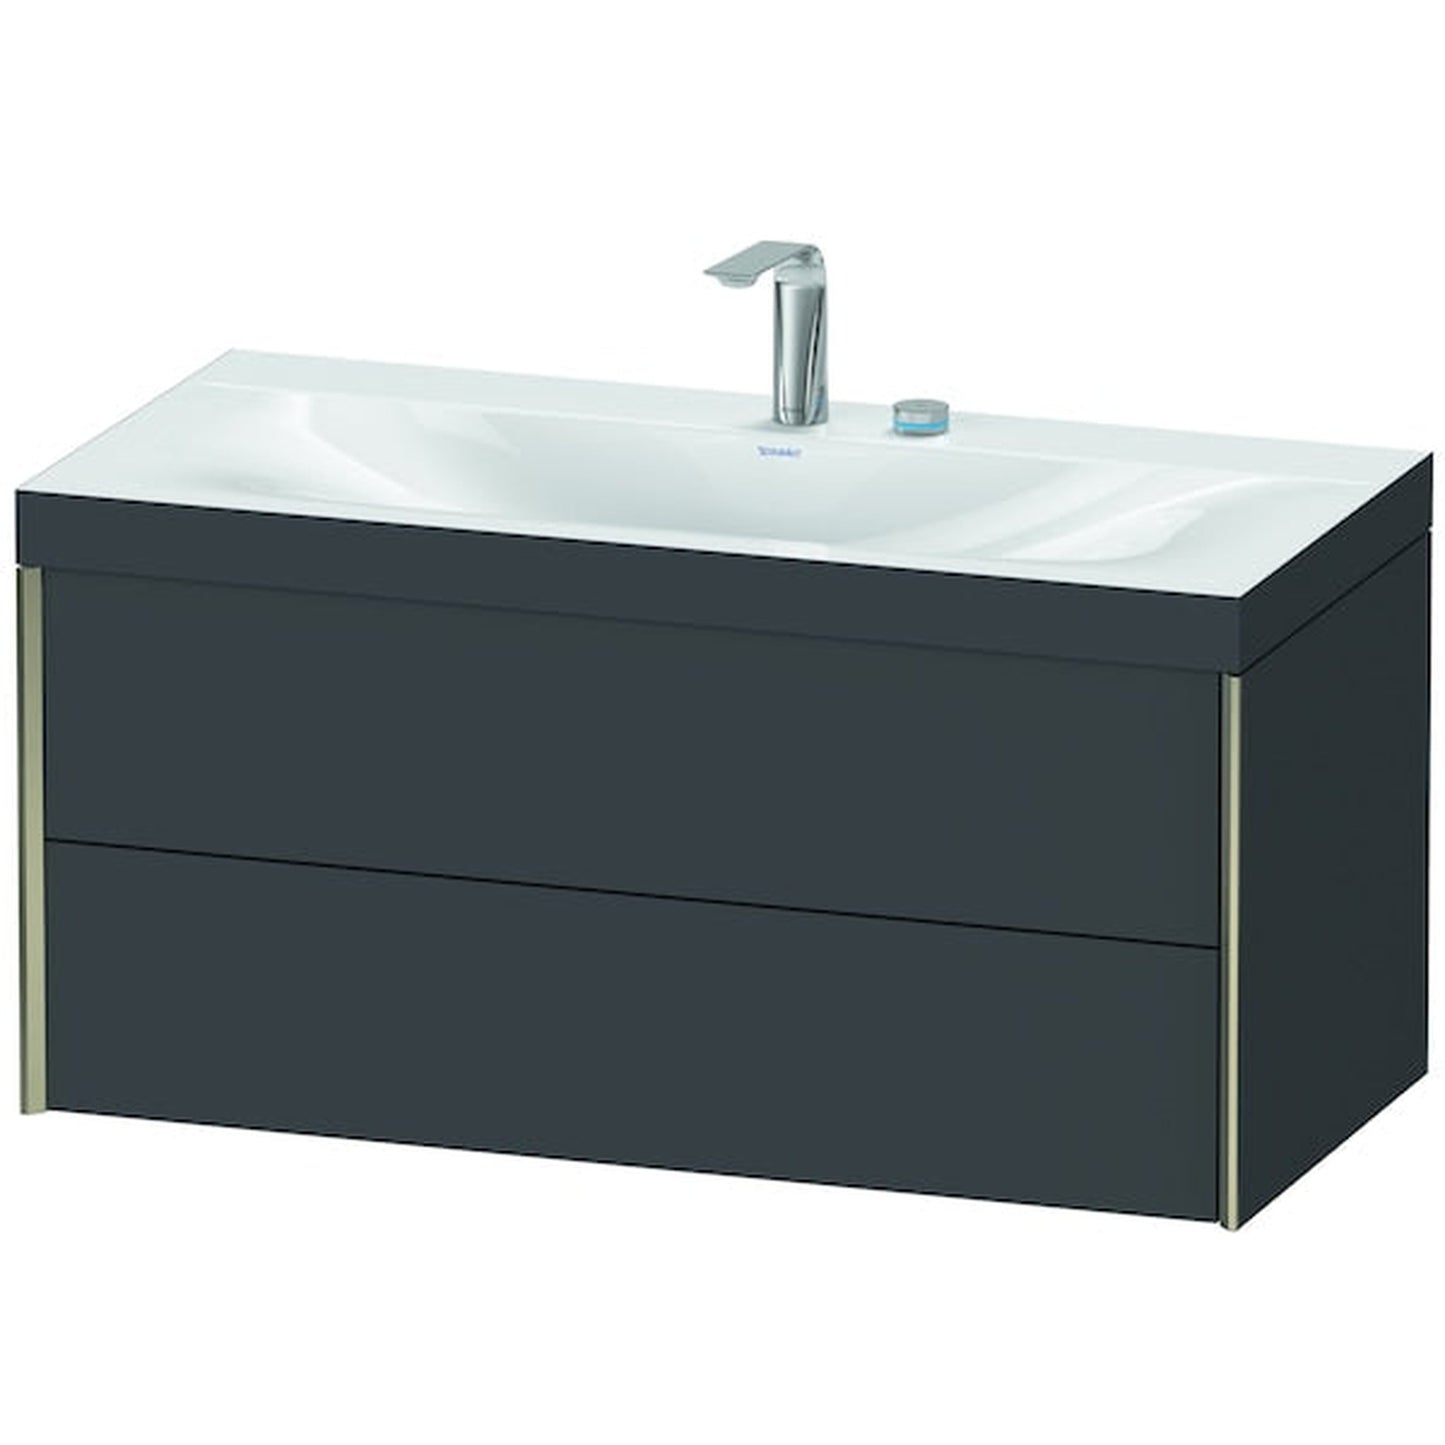 Duravit Xviu 39" x 20" x 19" Two Drawer C-Bonded Wall-Mount Vanity Kit With Two Tap Holes, Graphite (XV4616EB149C)